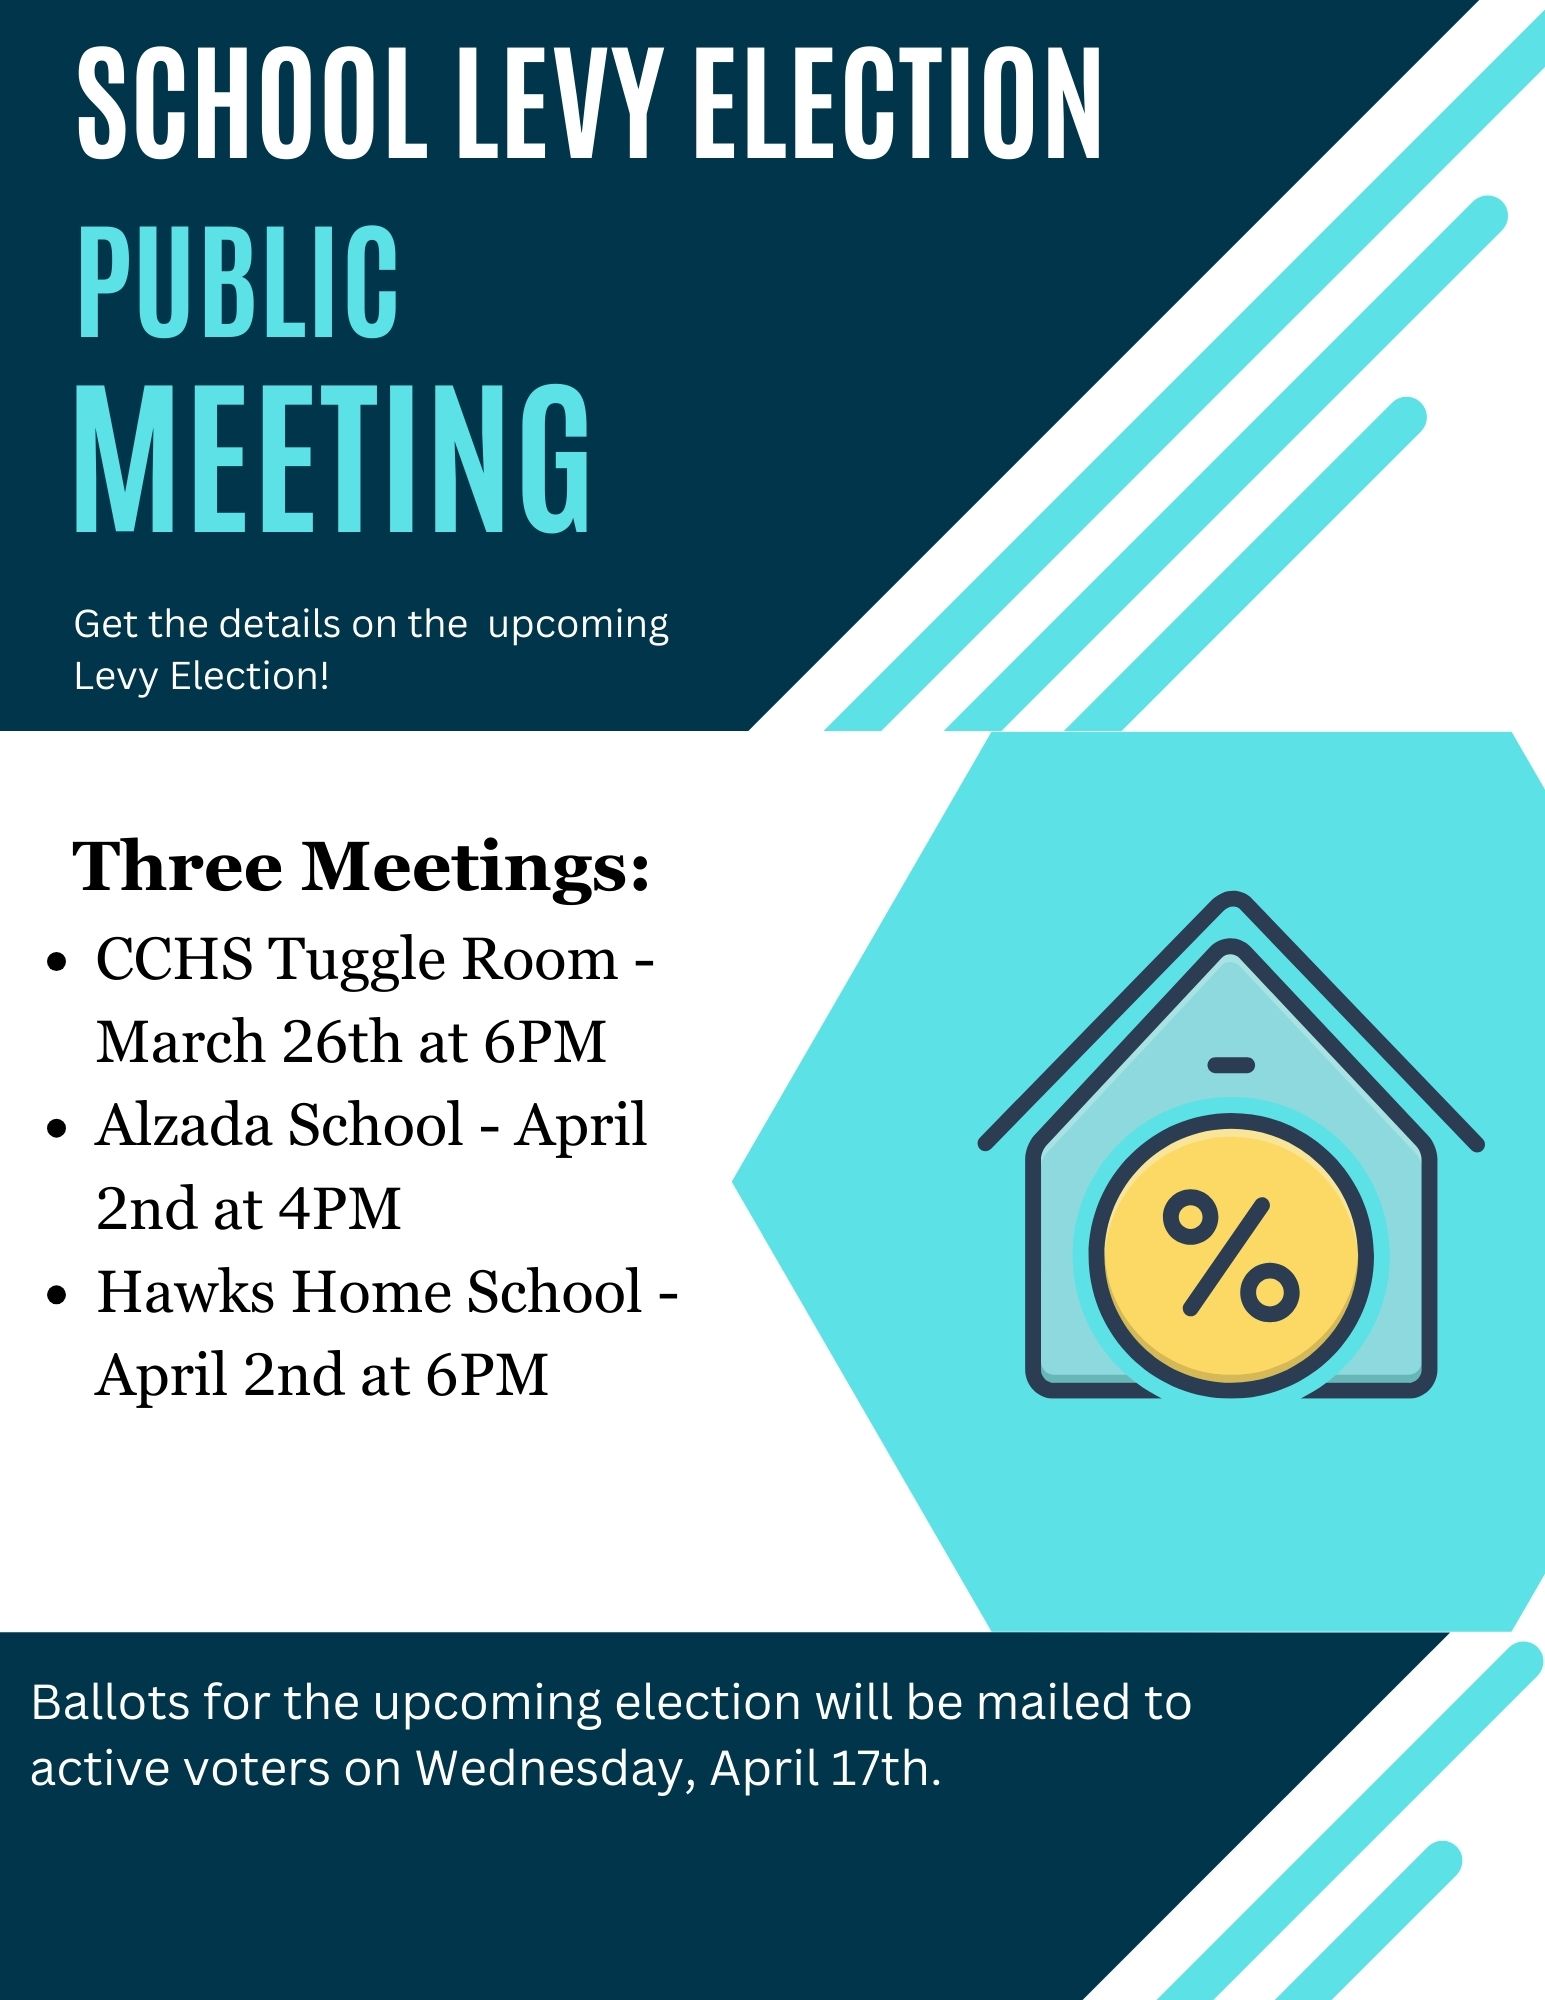 Three Meetings: CCHS Tuggle Room - March 26th at 6PM Alzada School - April 2nd at 4PM  Hawks Home School - April 2nd at 6PM